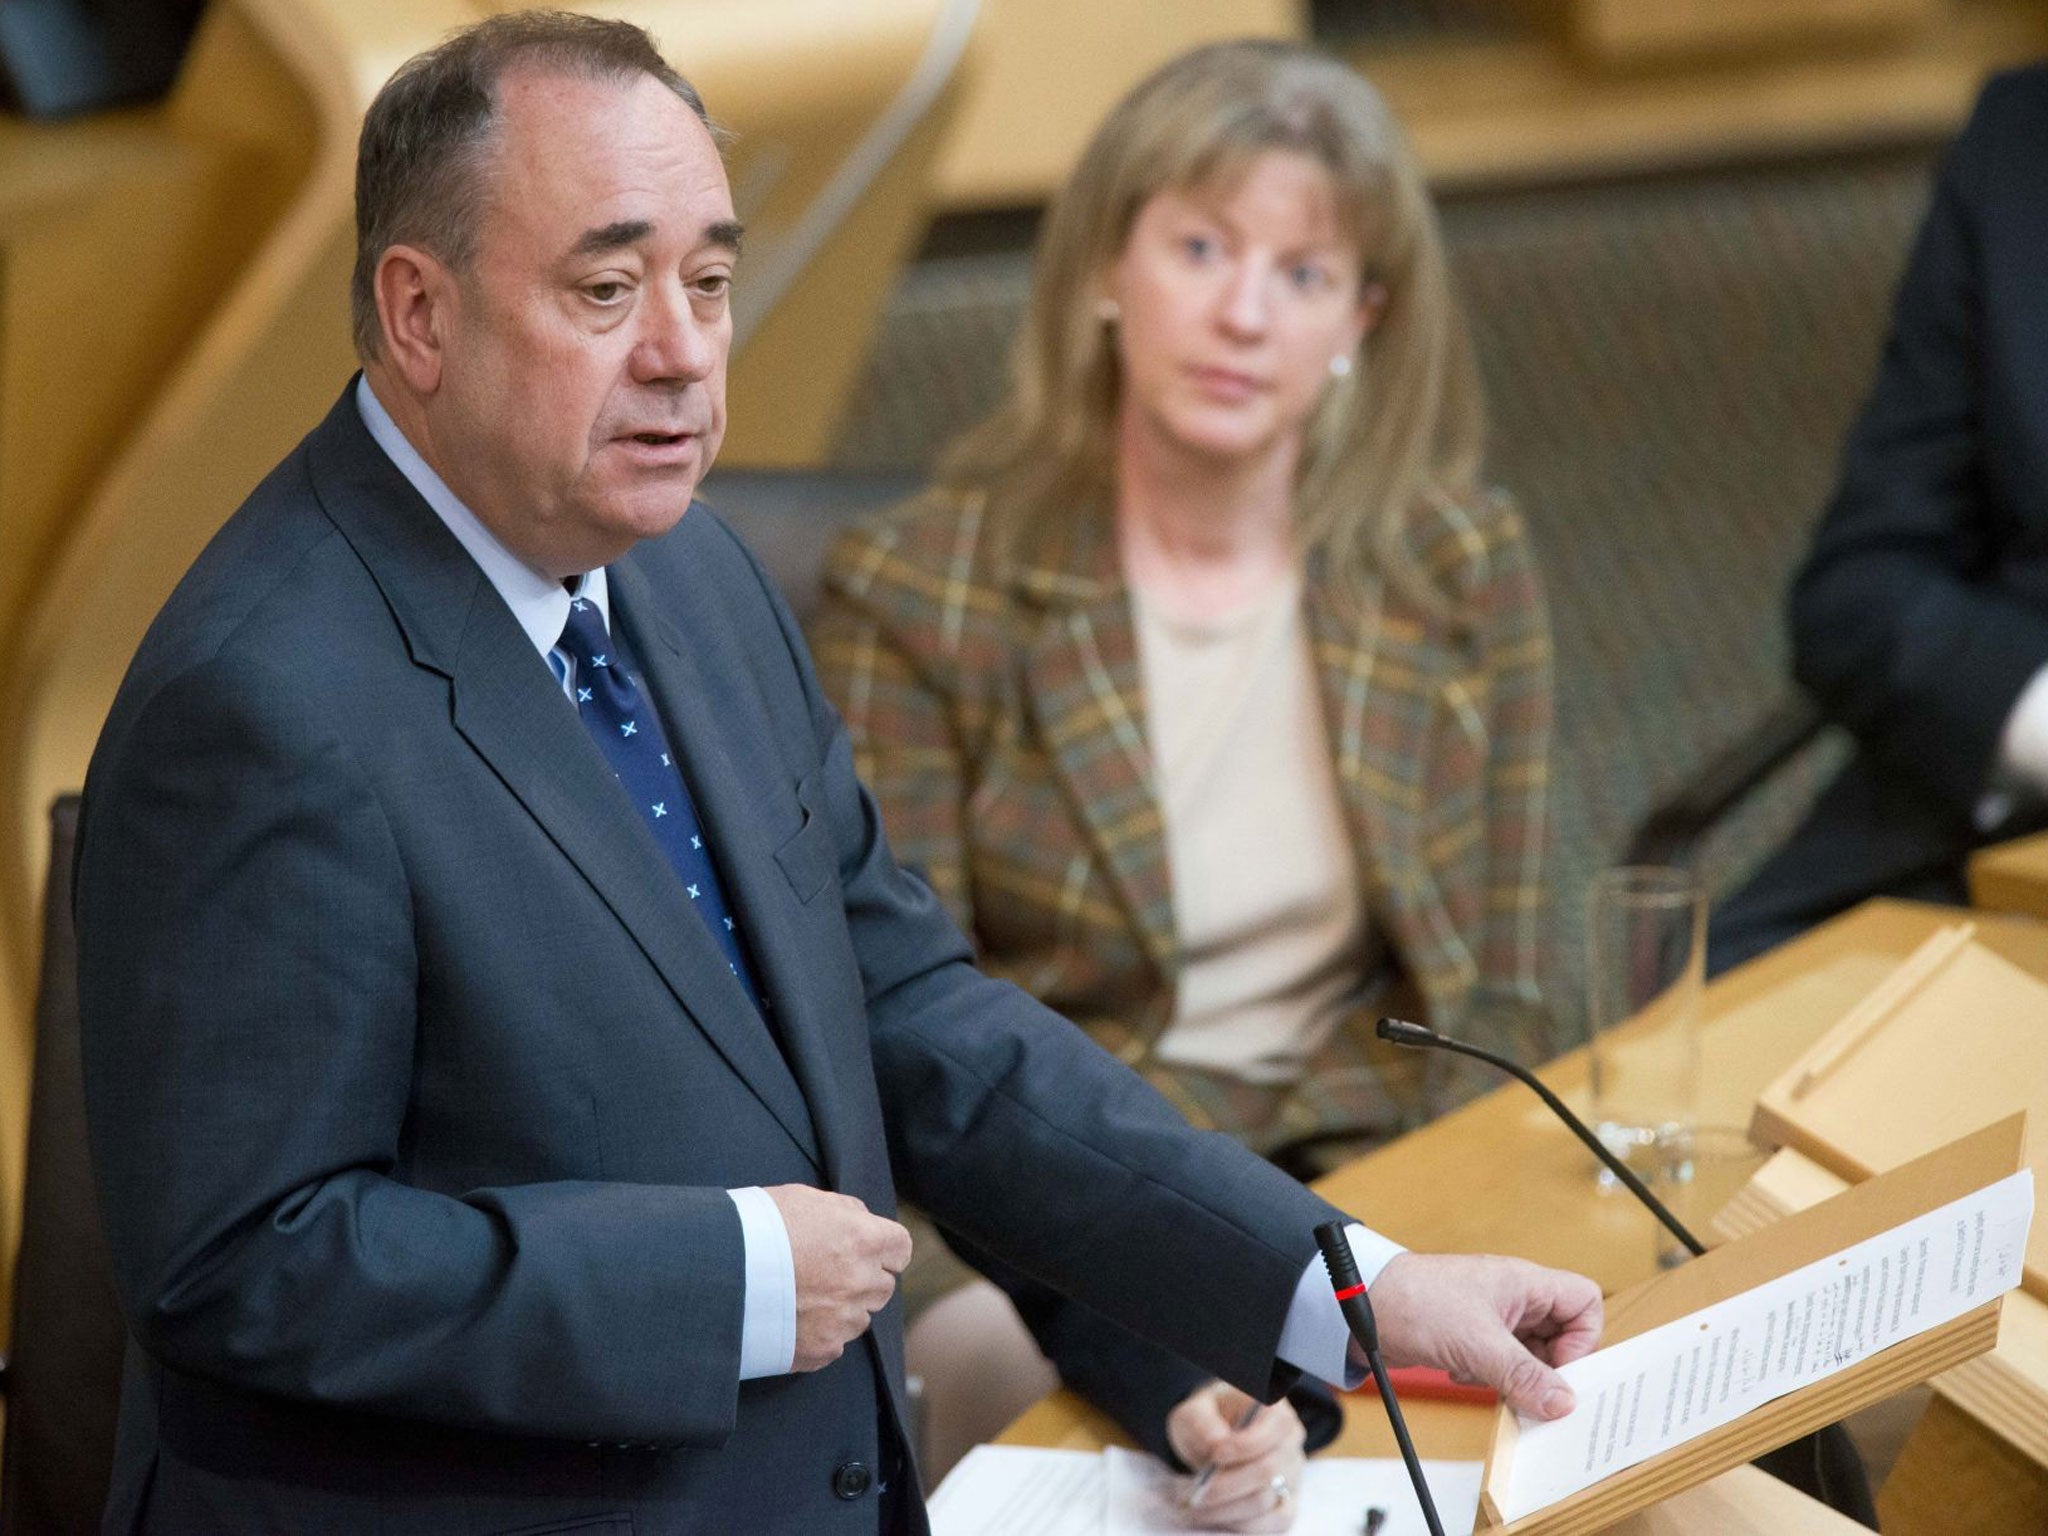 Alex Salmond addresses the Scottish Parliament for the first time since the referendum